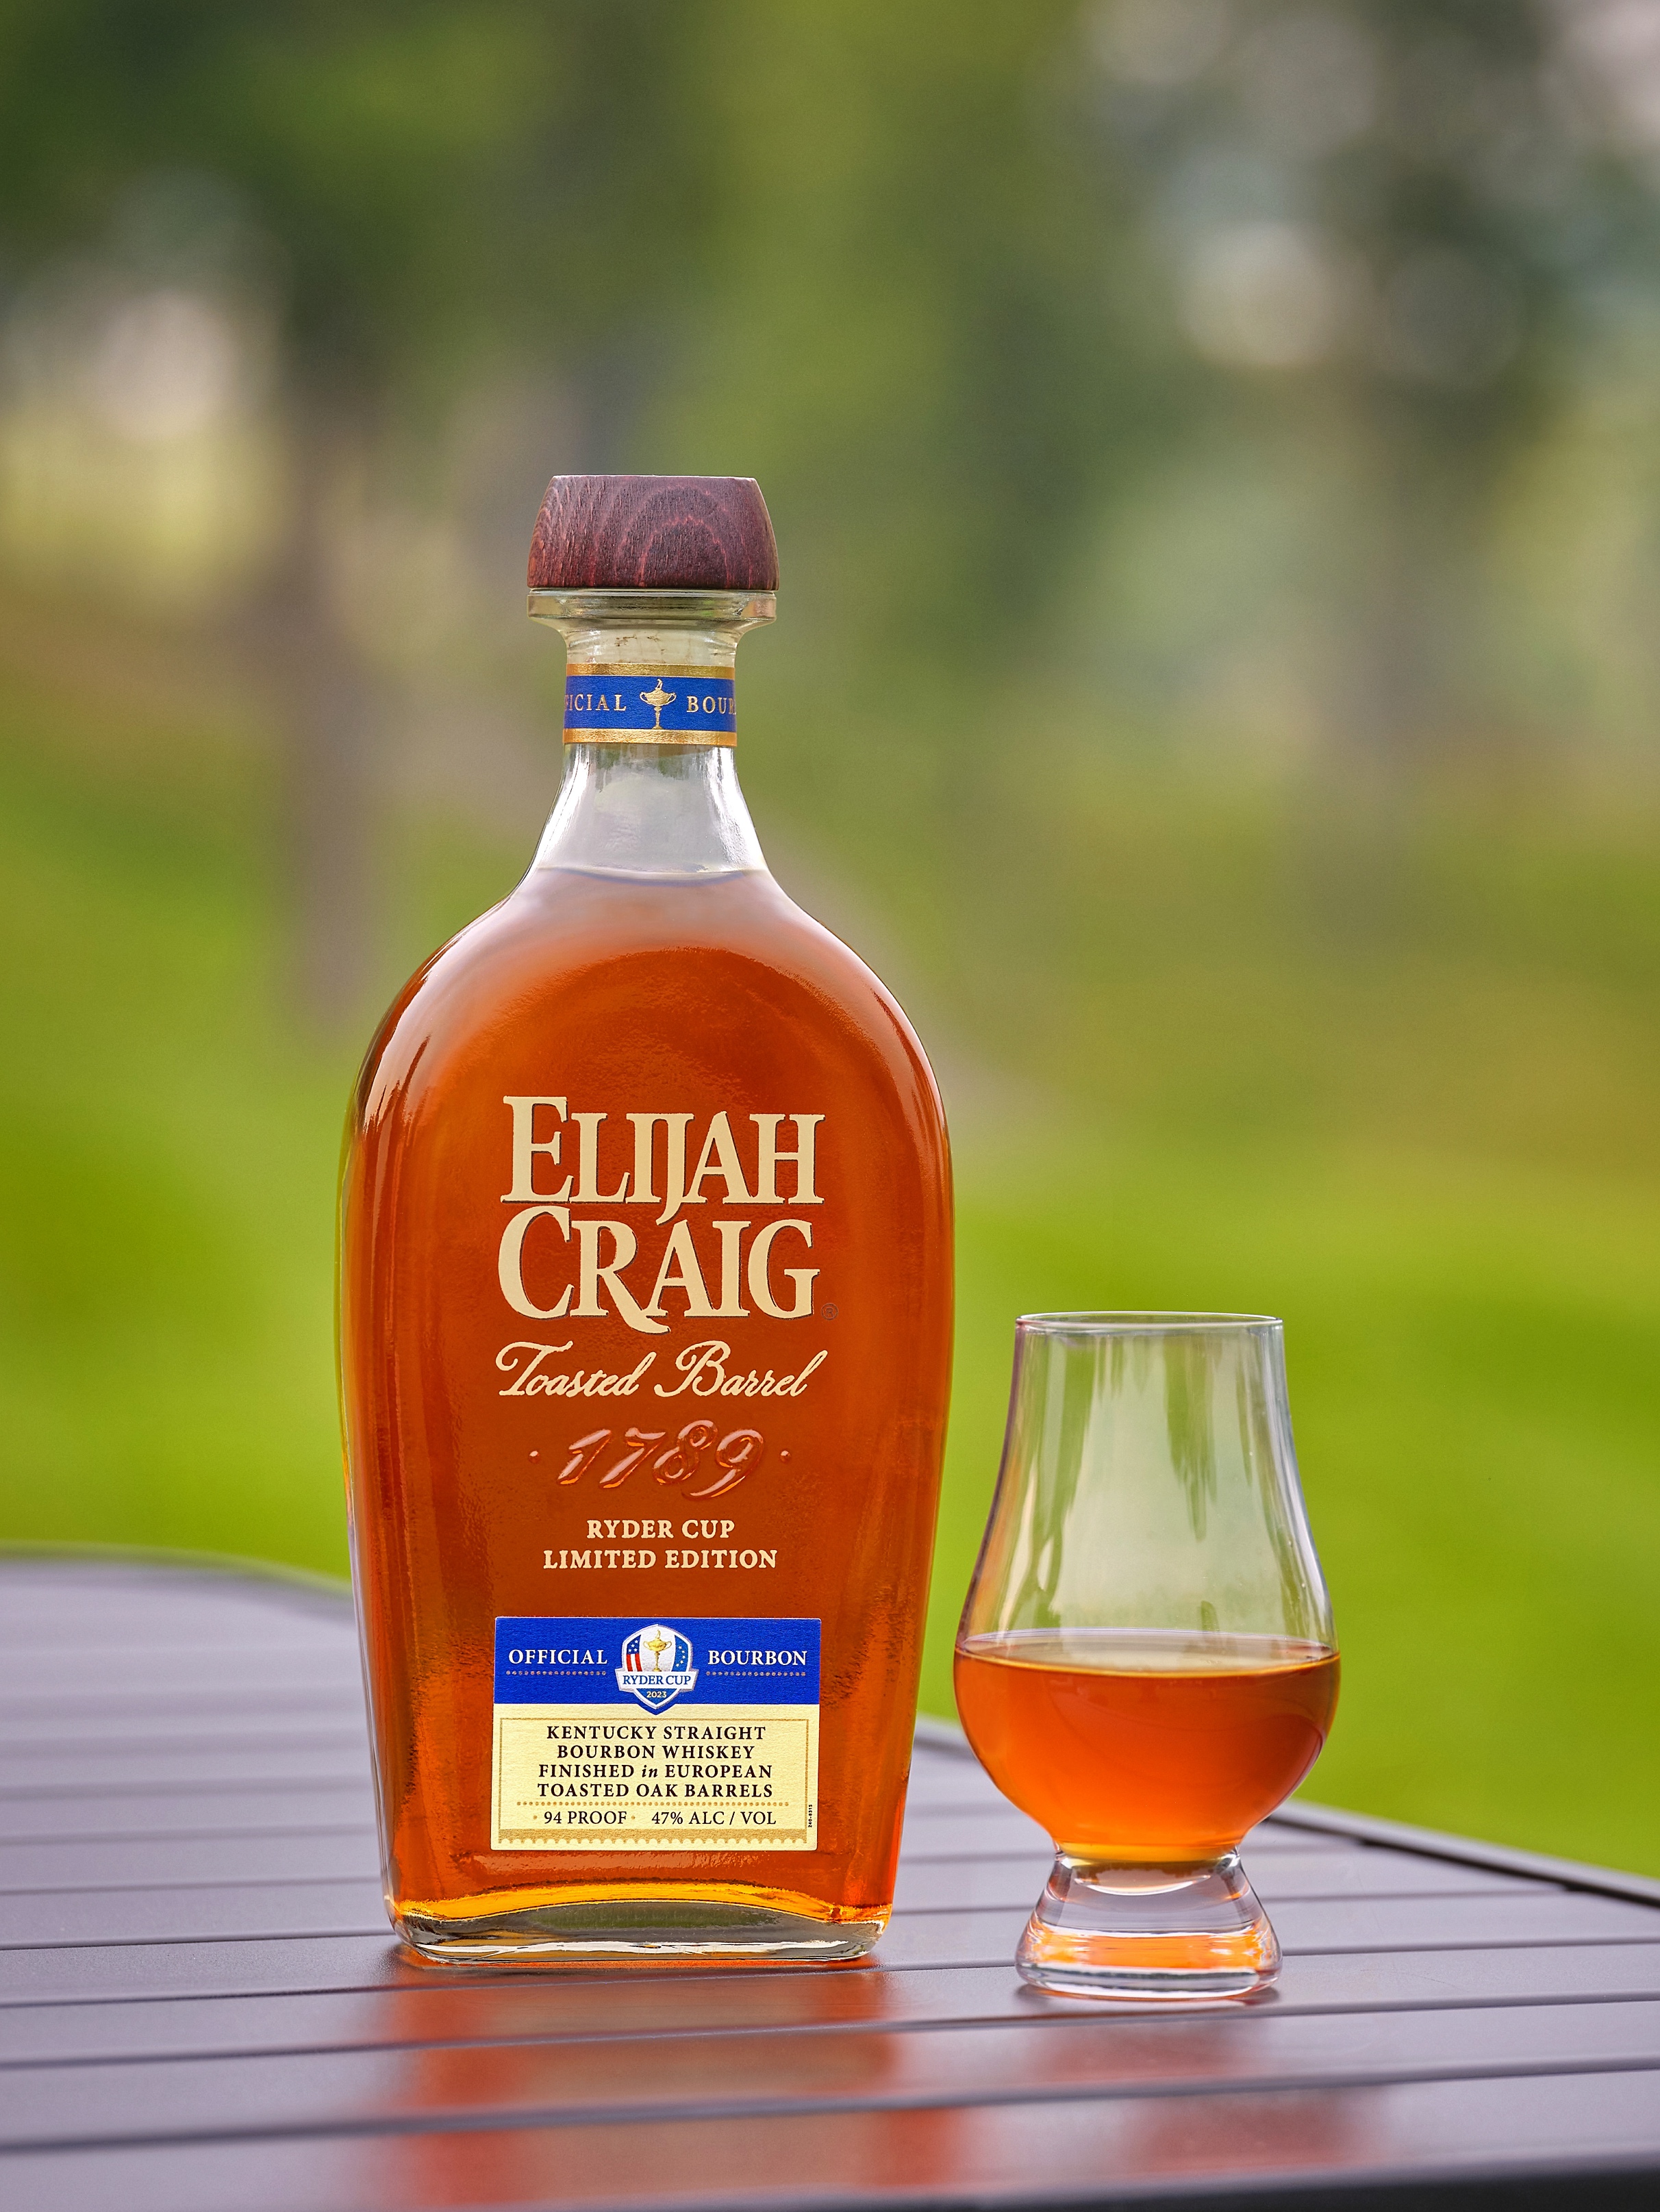 Elijah Craig Announces Special Release of Toasted Barrel Finish for Ryder Cup